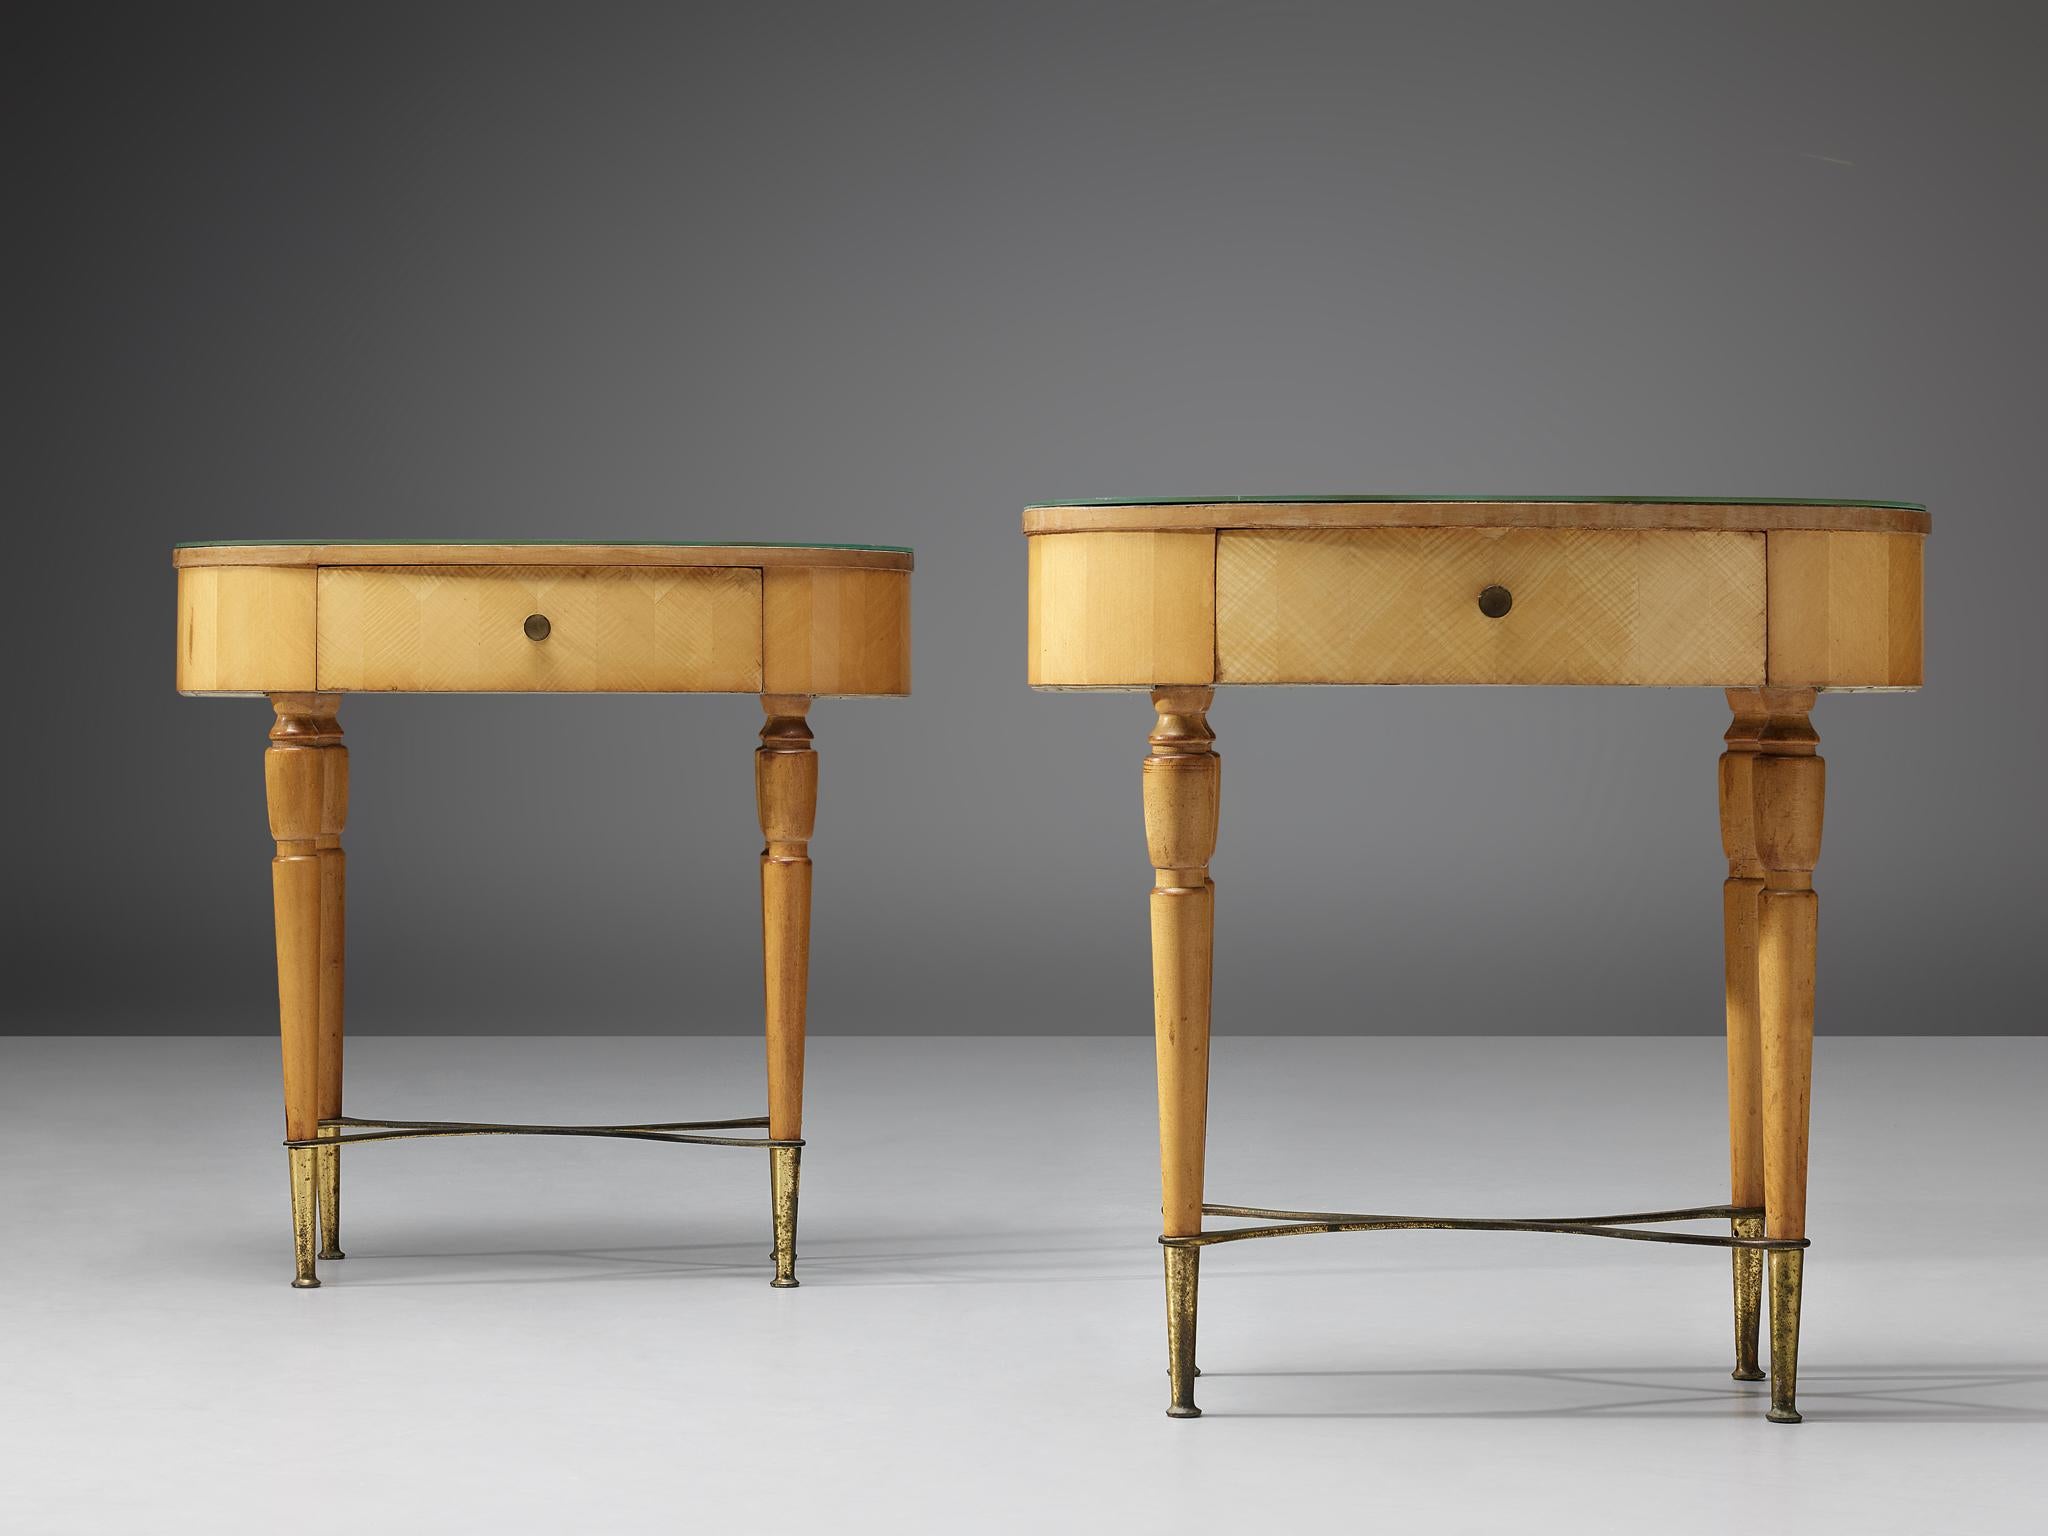 Pair of nightstands, beech, brass, glass, Italy, 1940s

These two nightstands show pure elegance. On brass feet the refined shaped legs evolve to the oval top with one drawer. The glass tabletop is colored green, the bright wood in combination